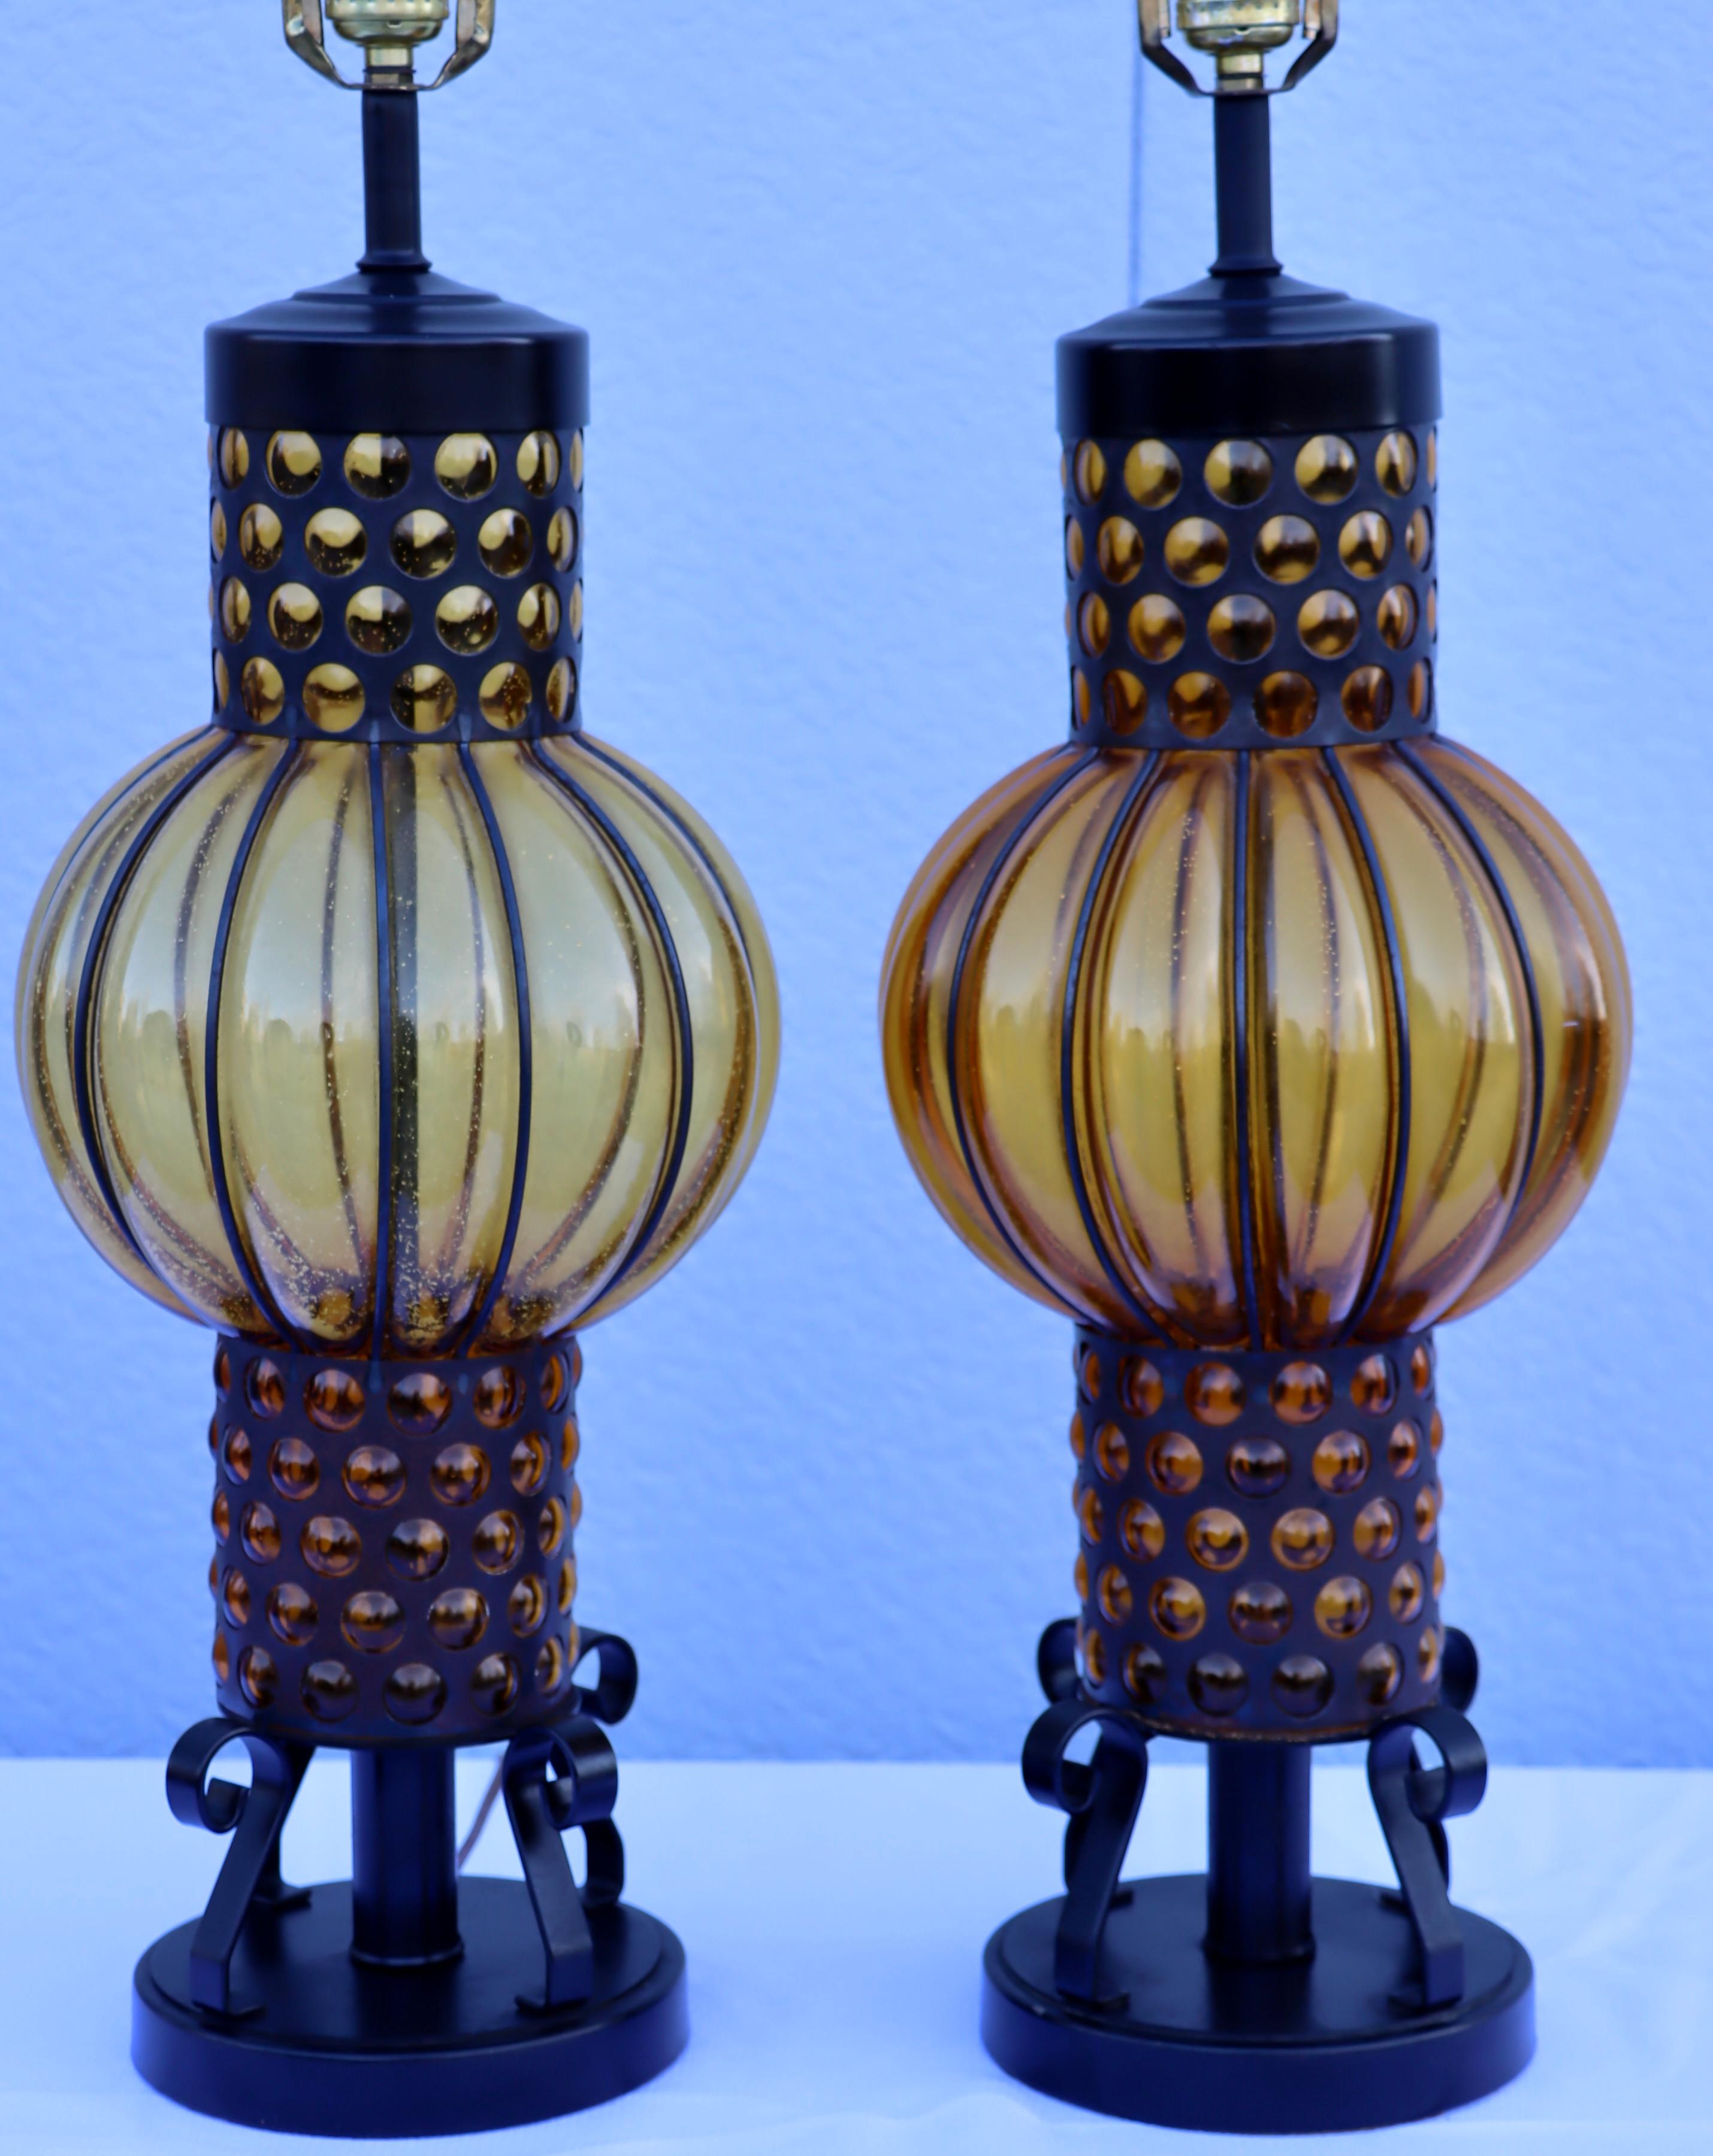 1960s blown glass and iron table lamps from Spain, in vintage original condition with some wear and patina due to age and use.

Measures: Height to light socket 26''.